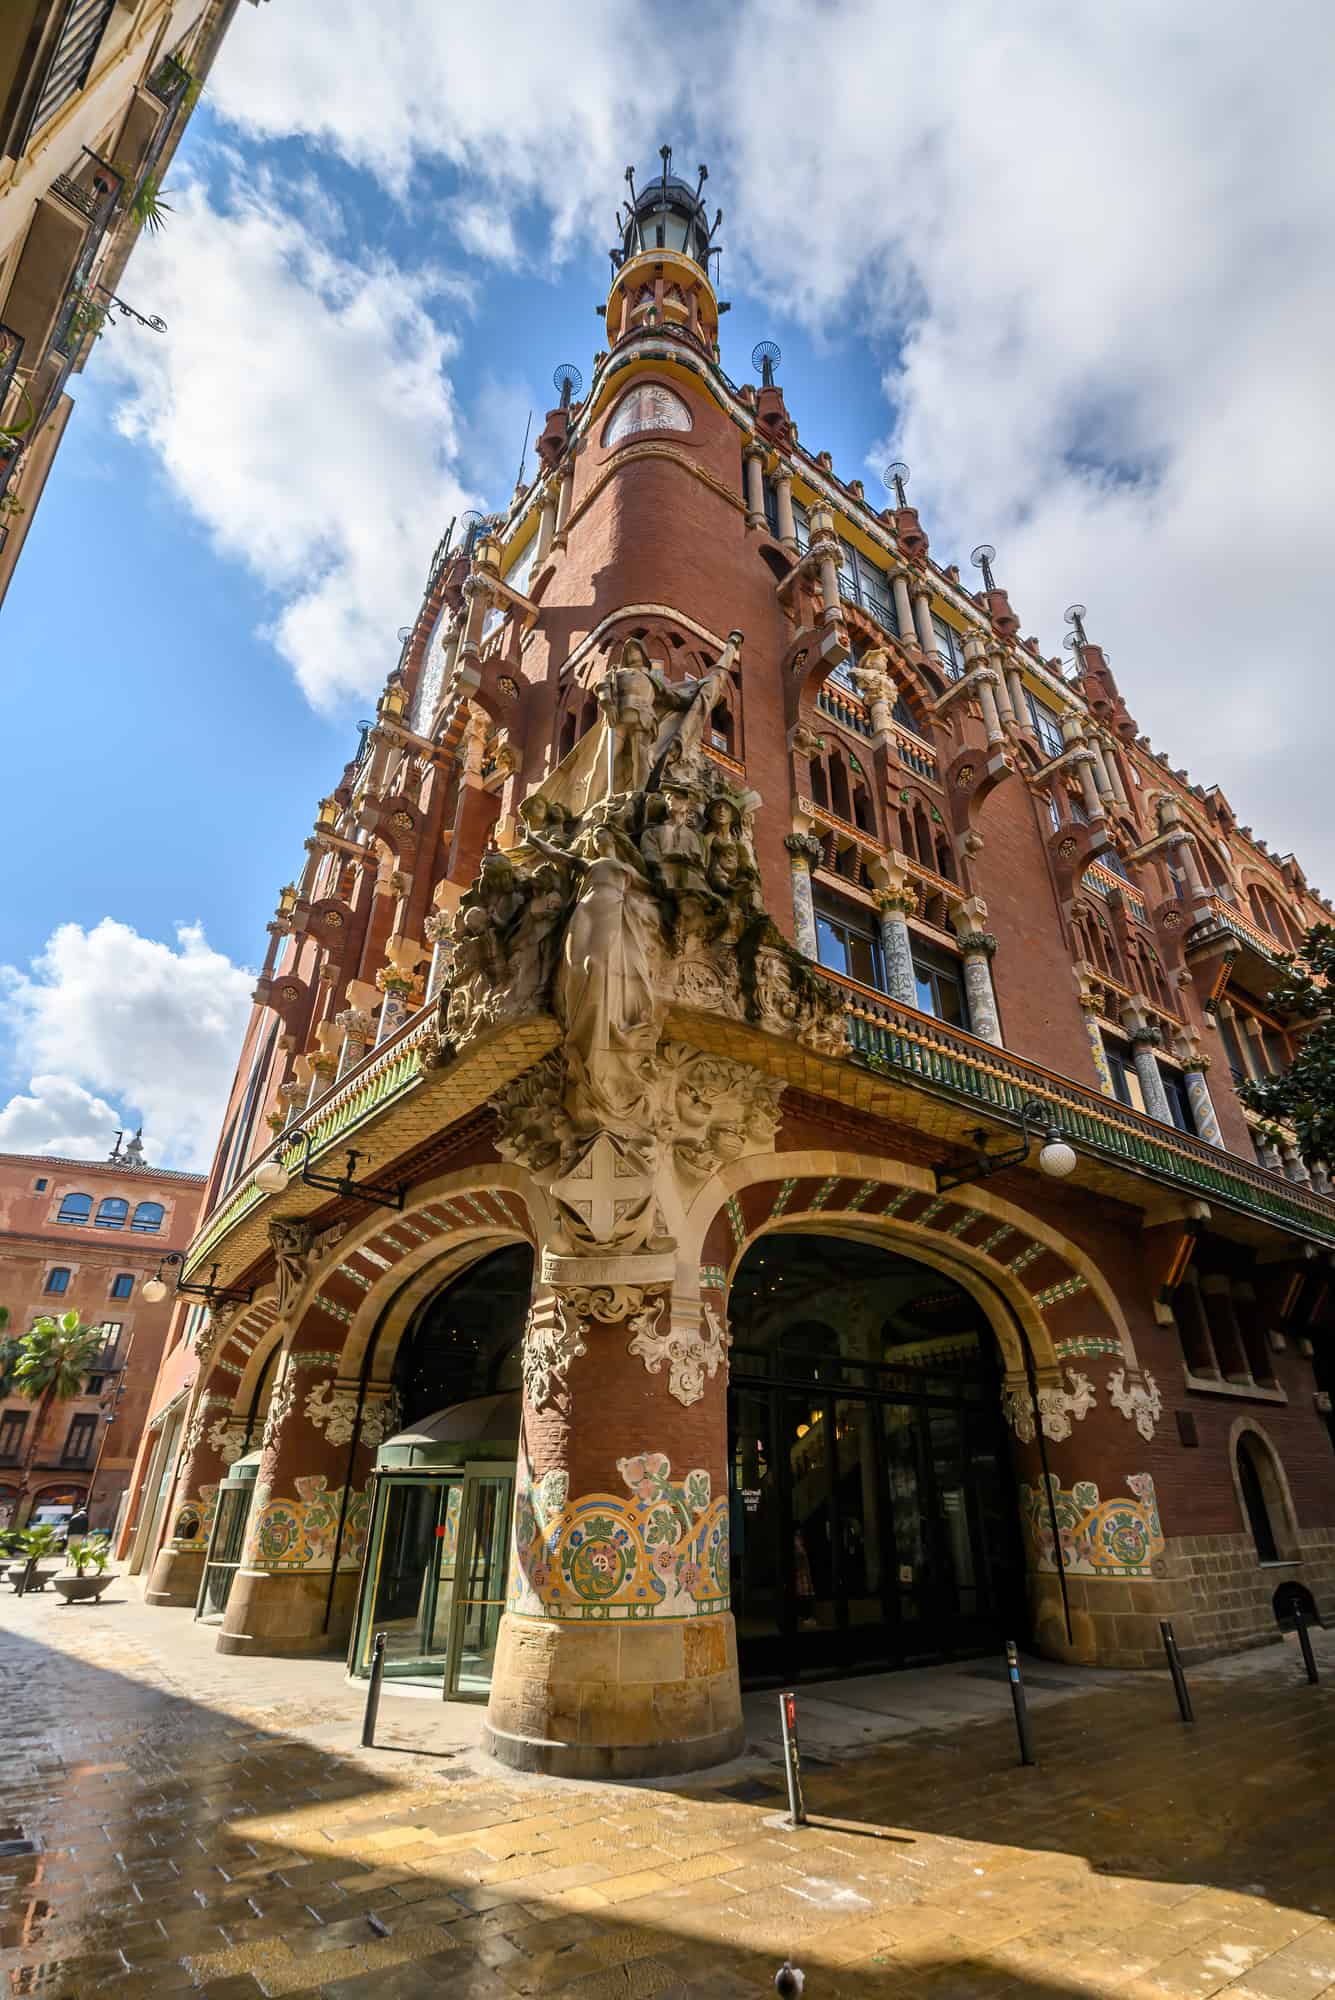 Barcelona, Spain. Palace of Catalan music or The Palau de la Musica Catalana is a concert hall, built by the architect Lluis Domenech i Montaner